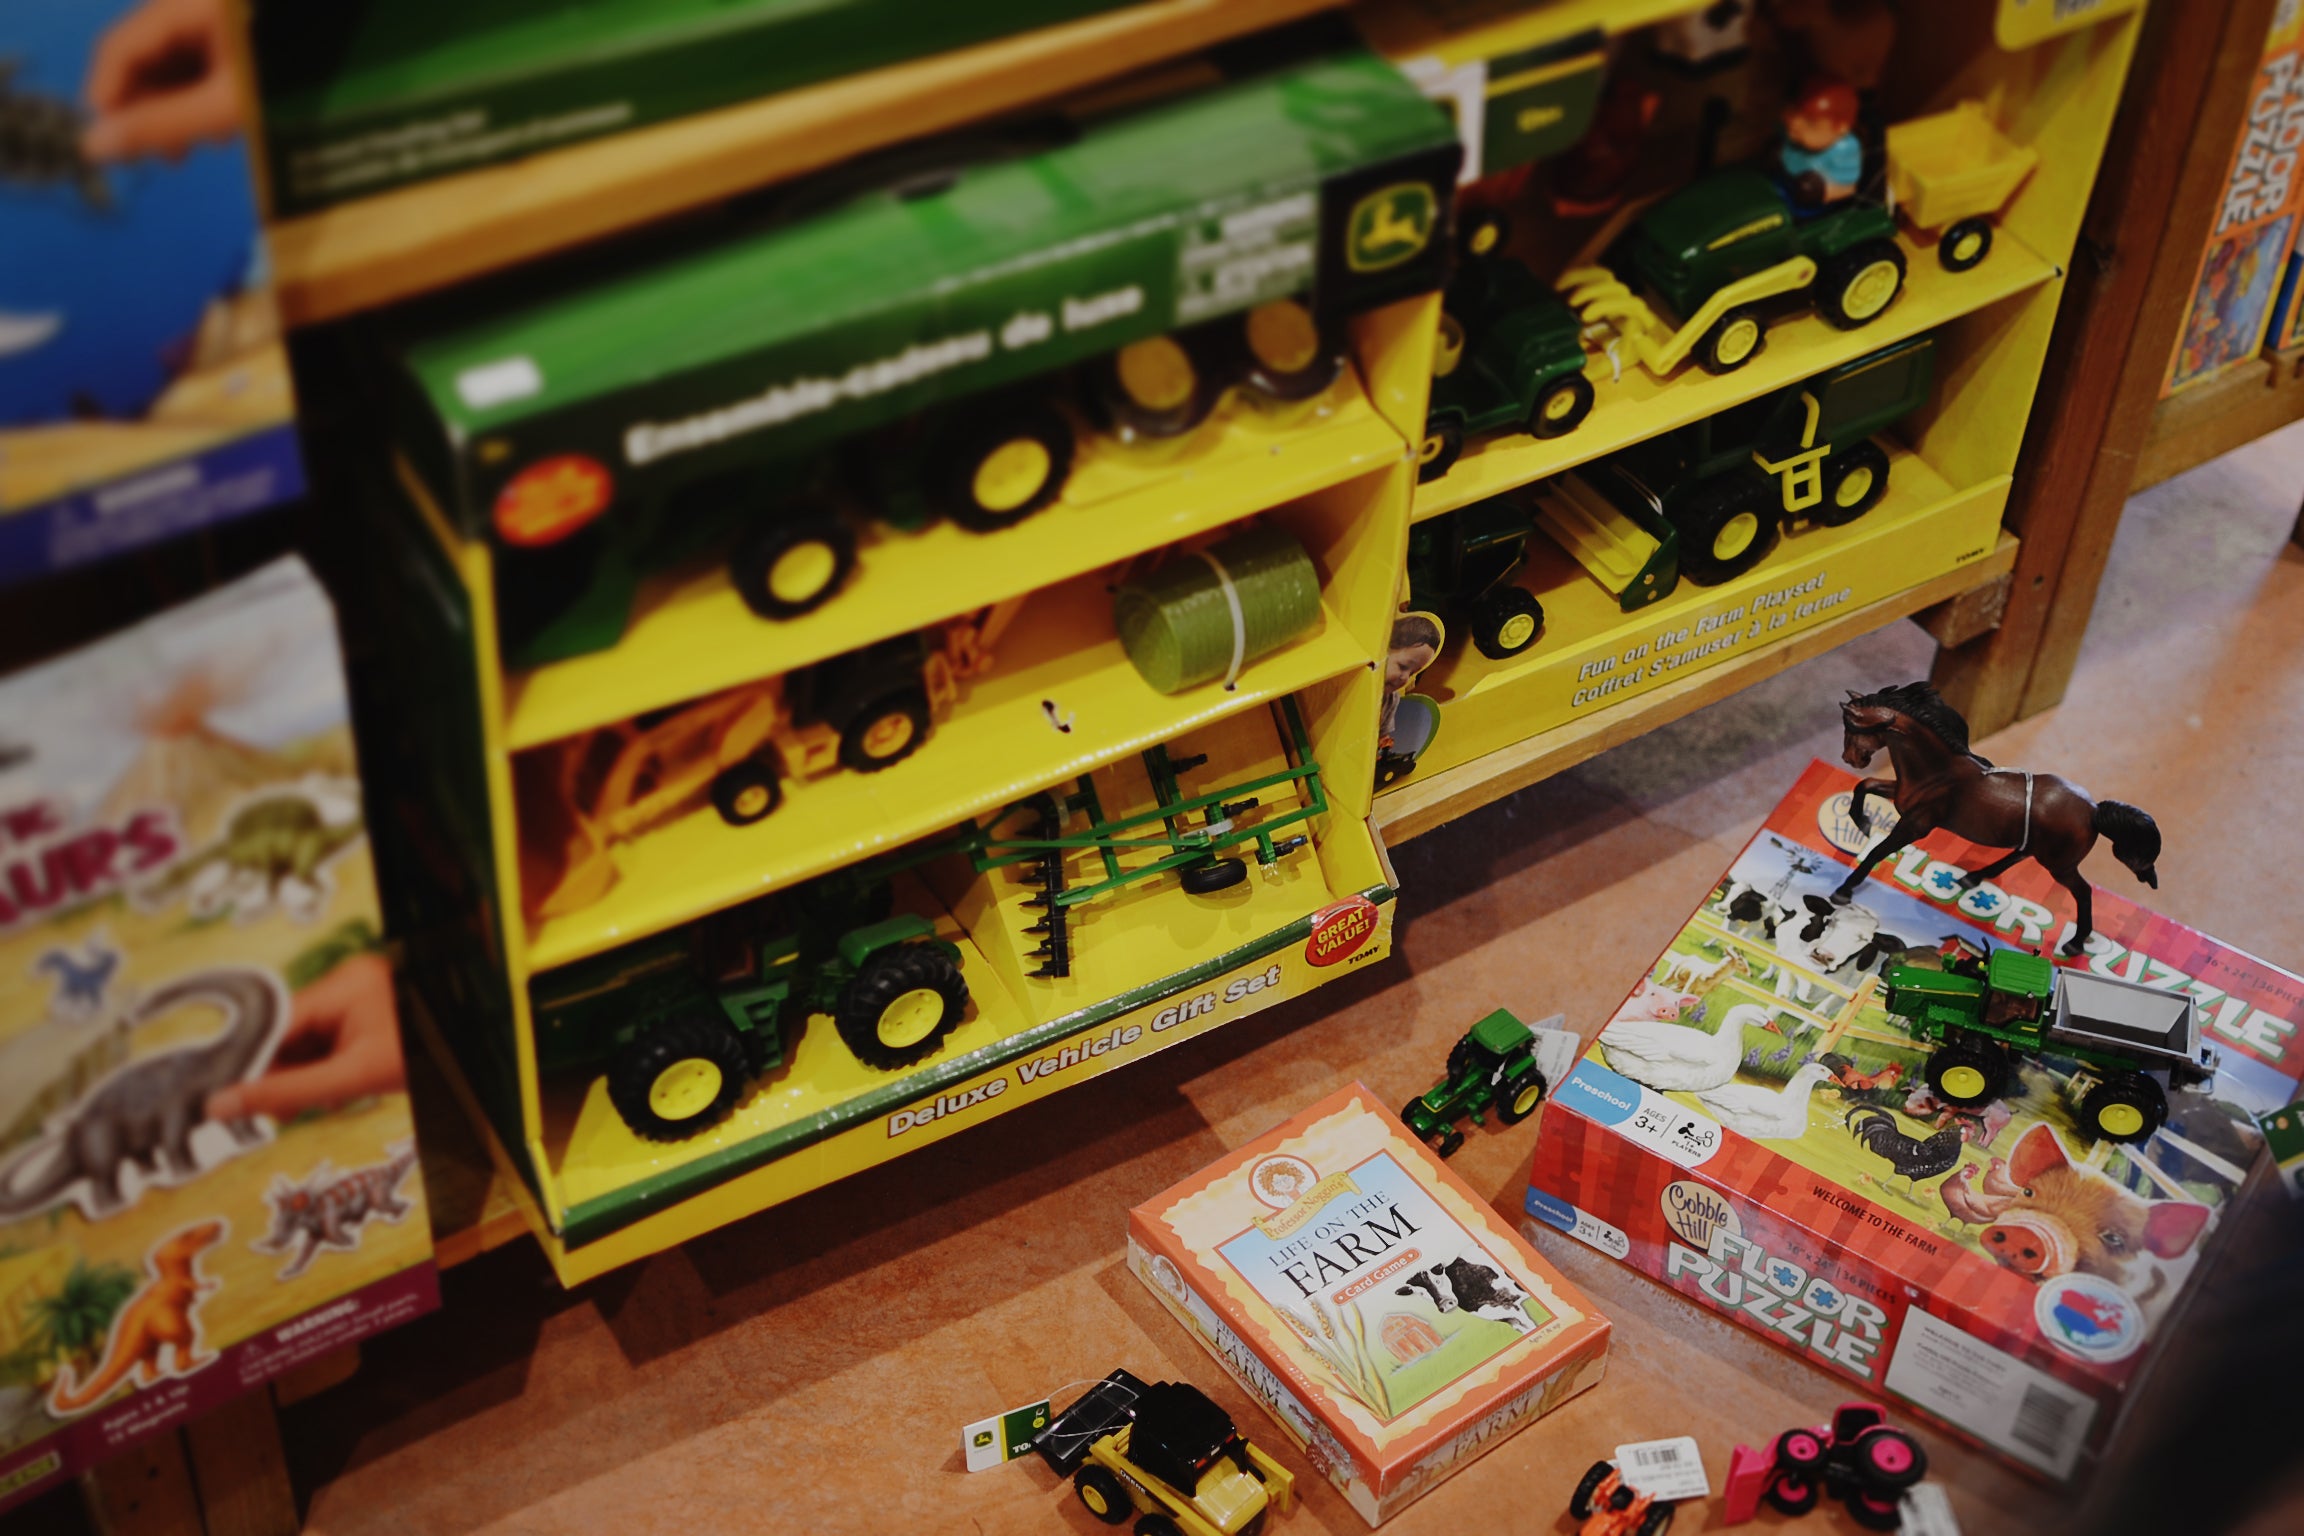 Farm-themed toys including John Deere tractors, farm animals, and games